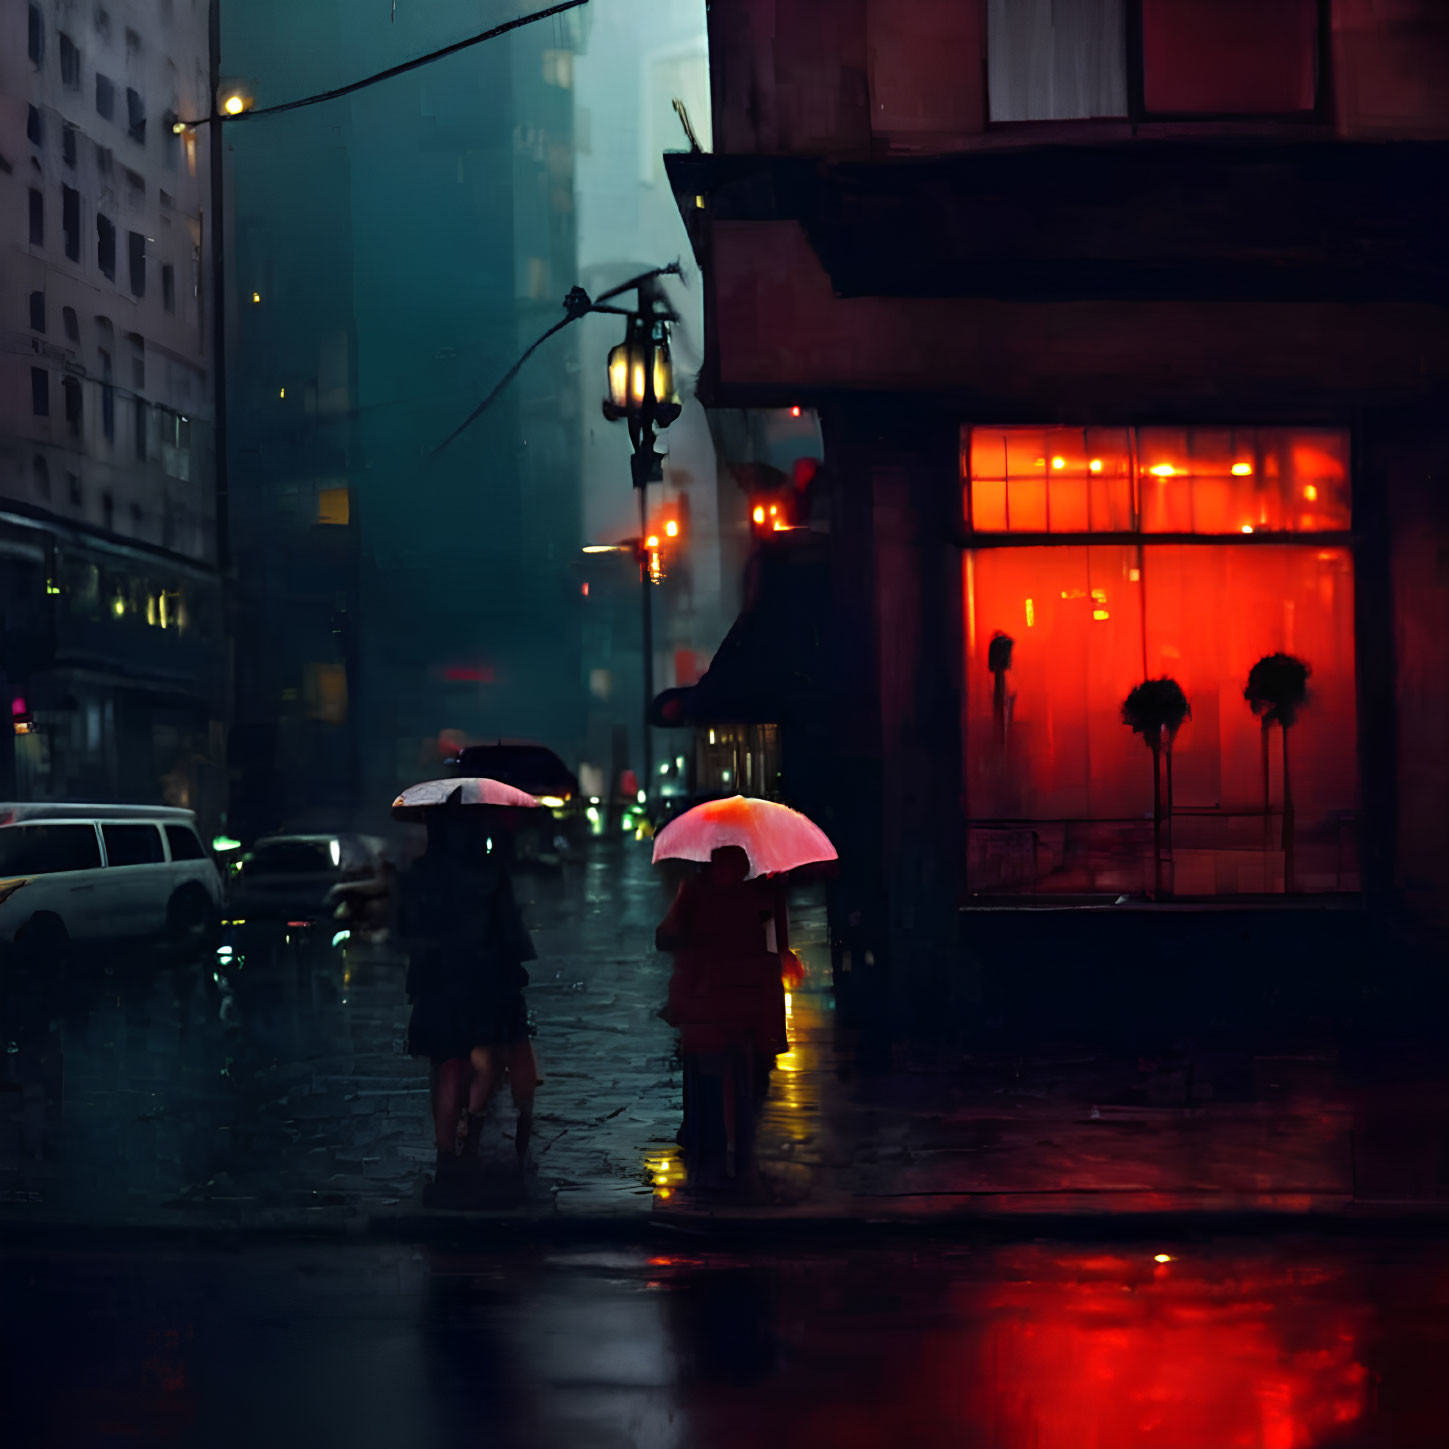 Night scene: Two people with umbrellas under red neon lights in the rain